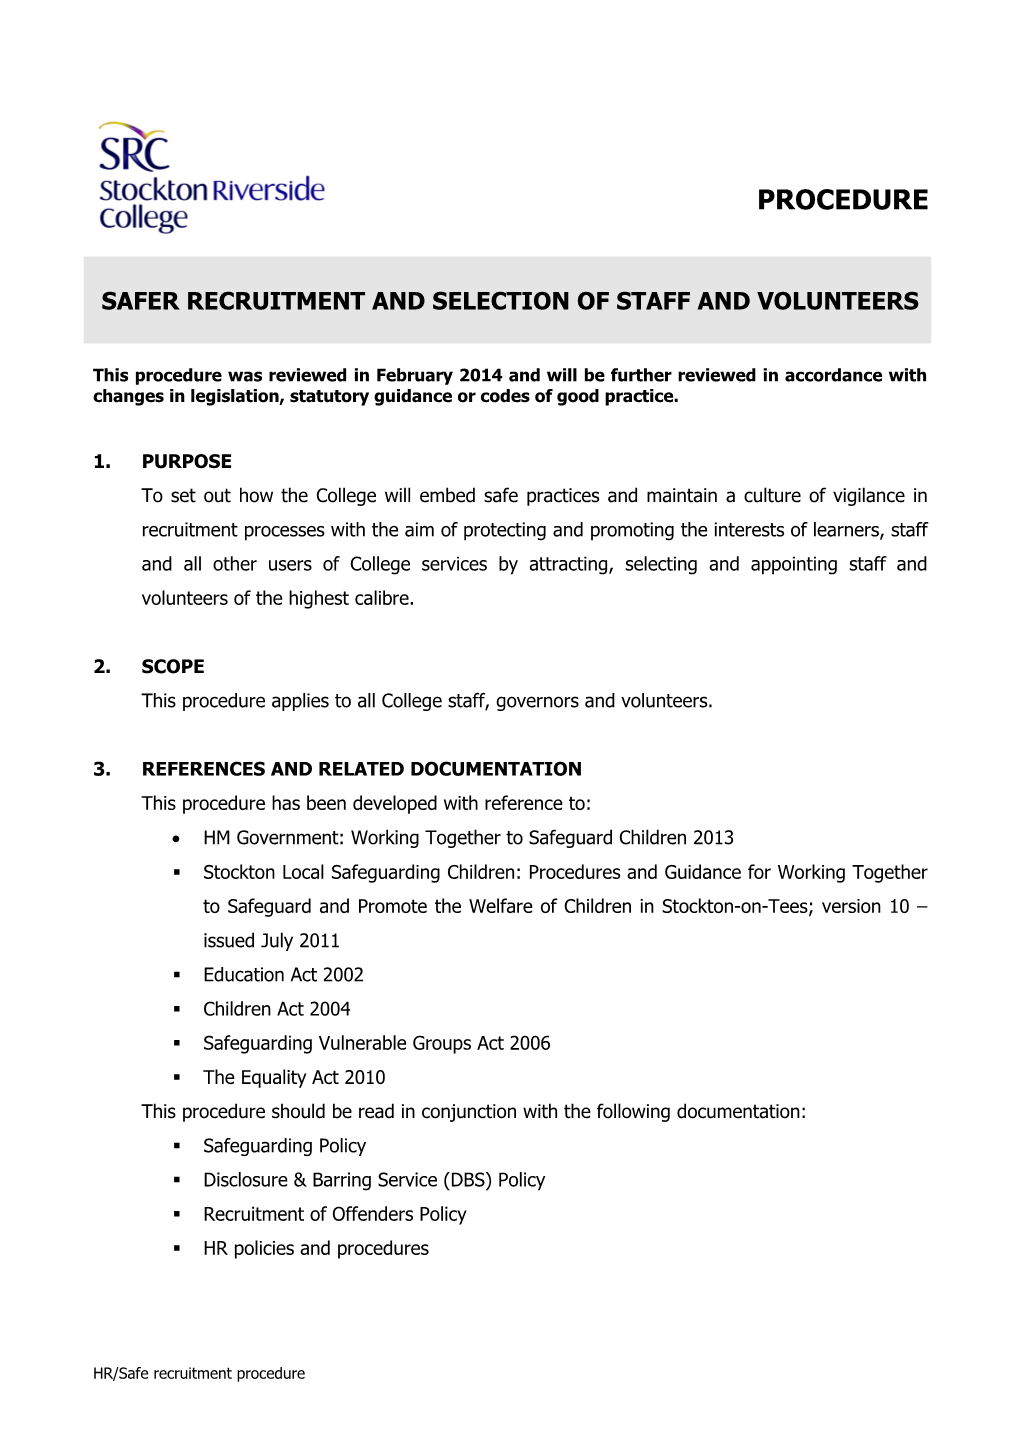 Safer Recruitment and Selection of Staff and Volunteers V2